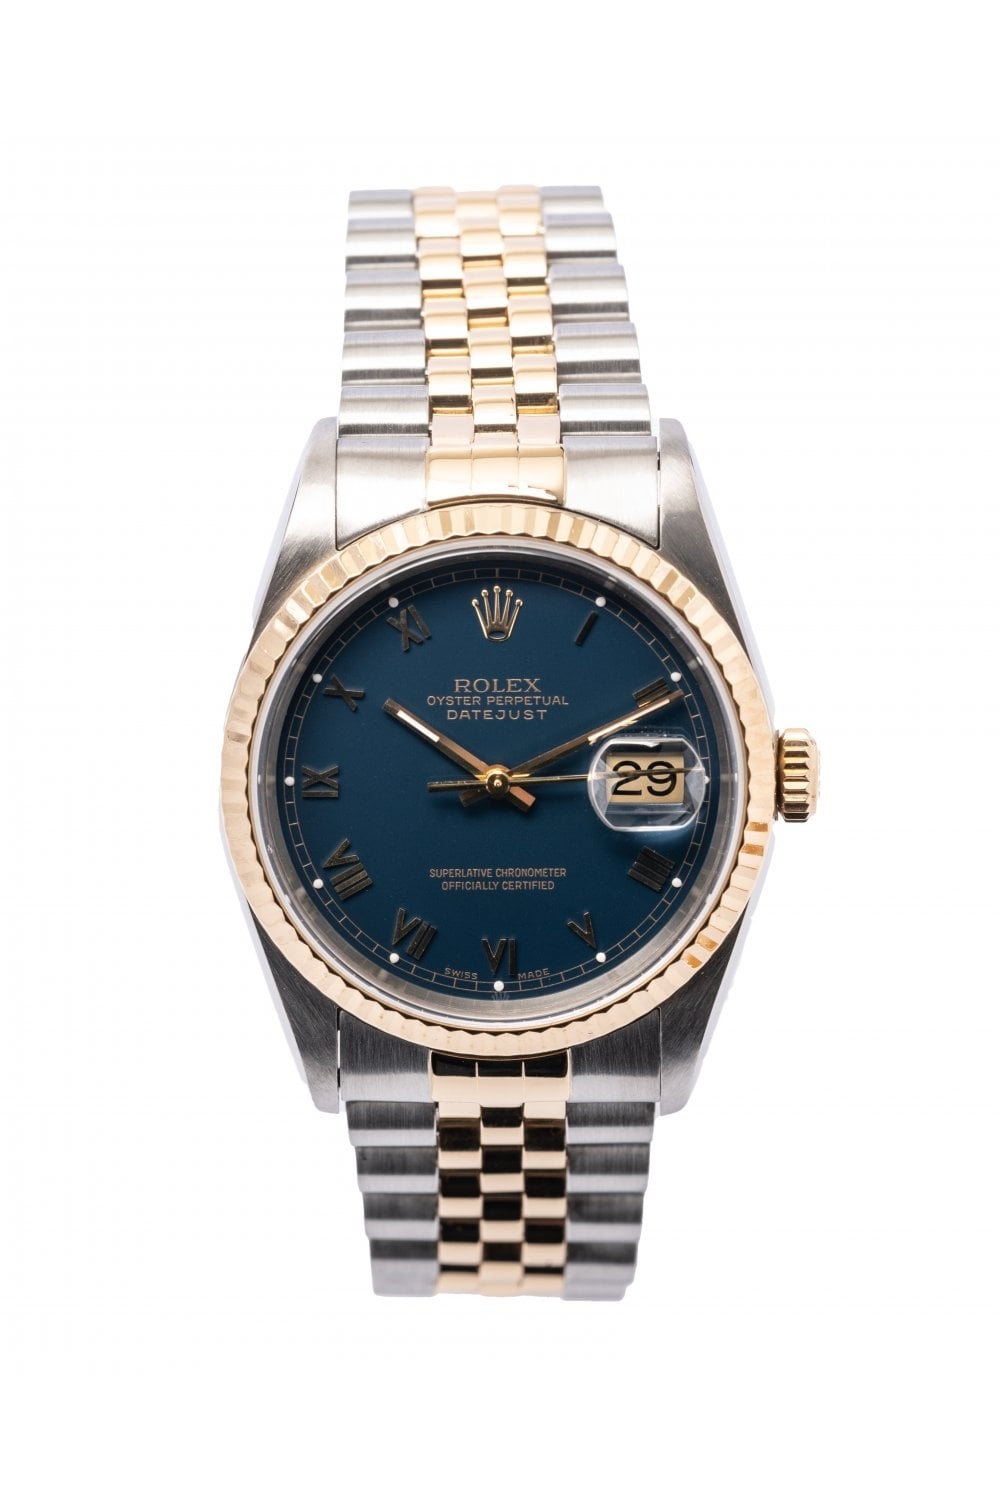 Rolex Datejust 16233 No Papers 2000